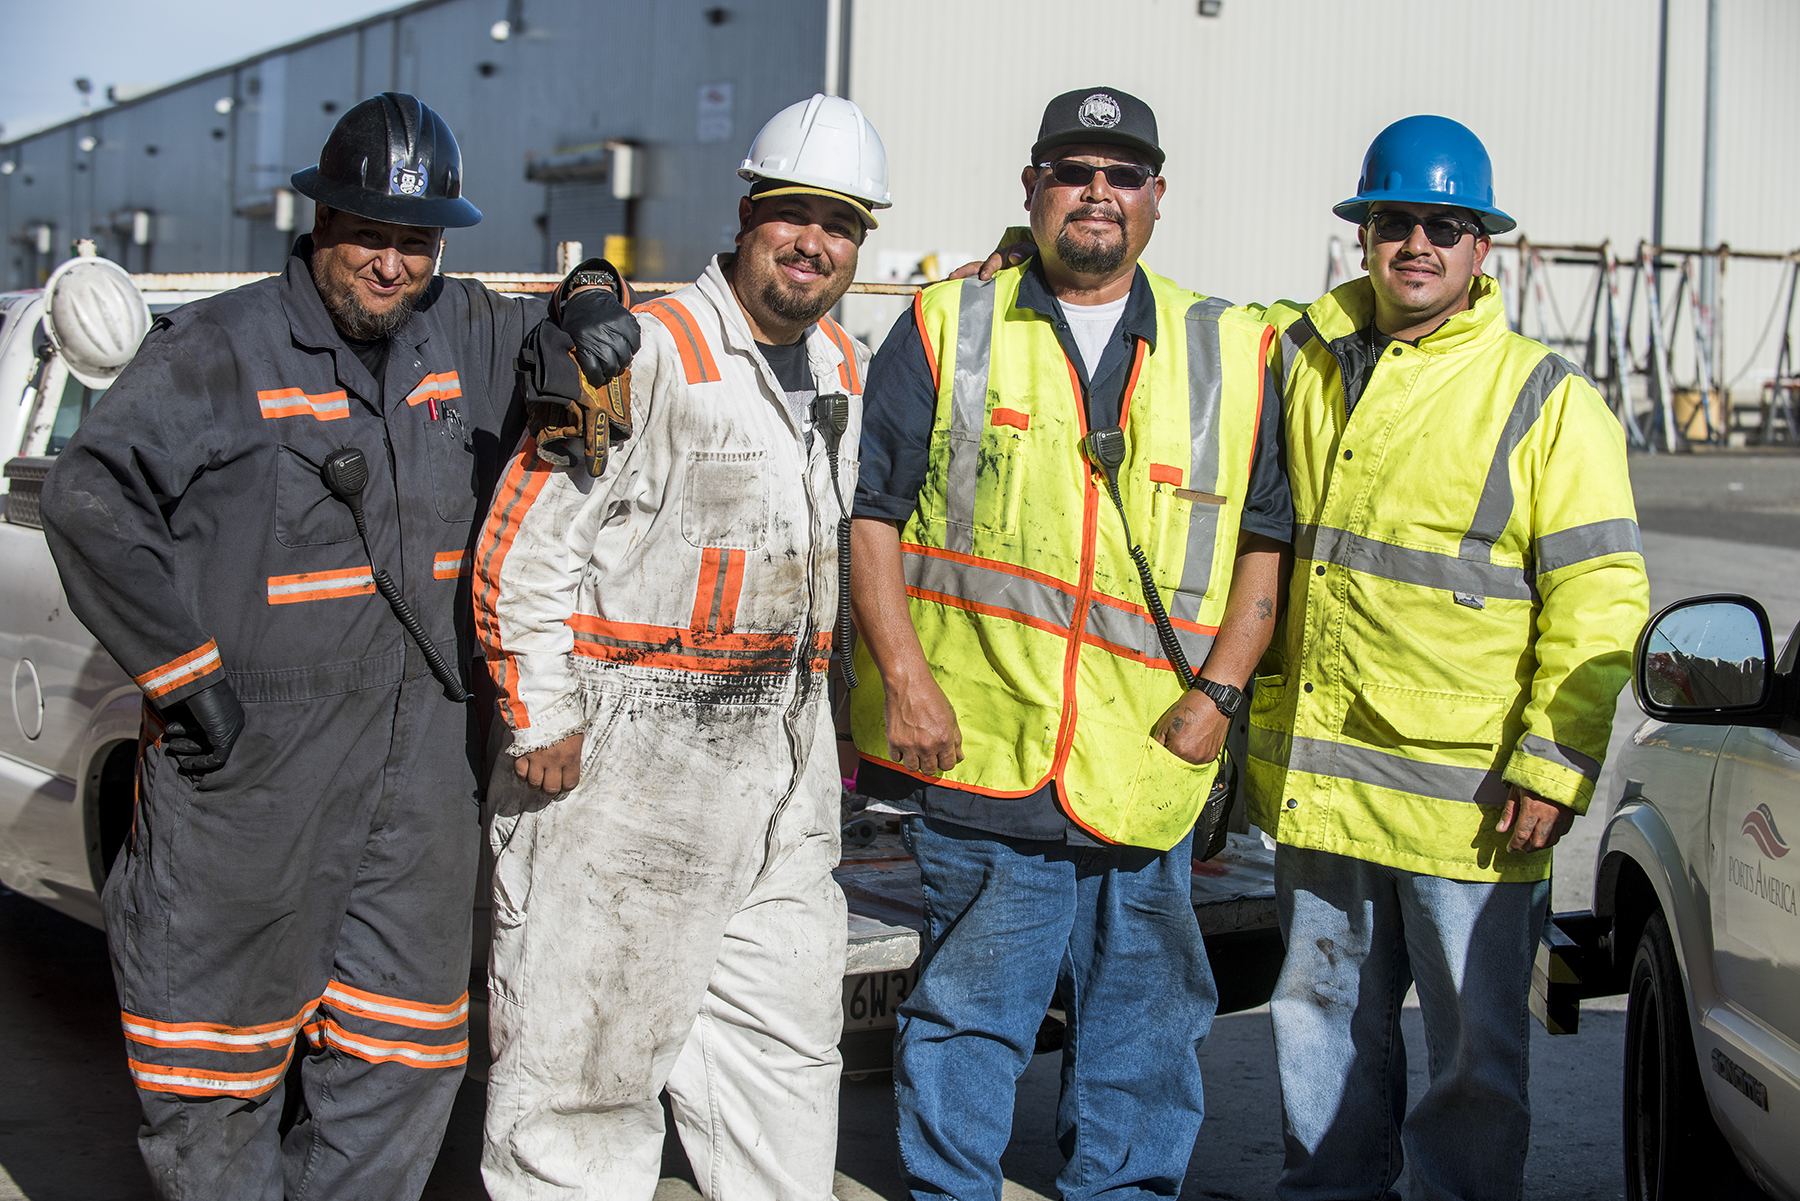 Workers at the Port of Hueneme